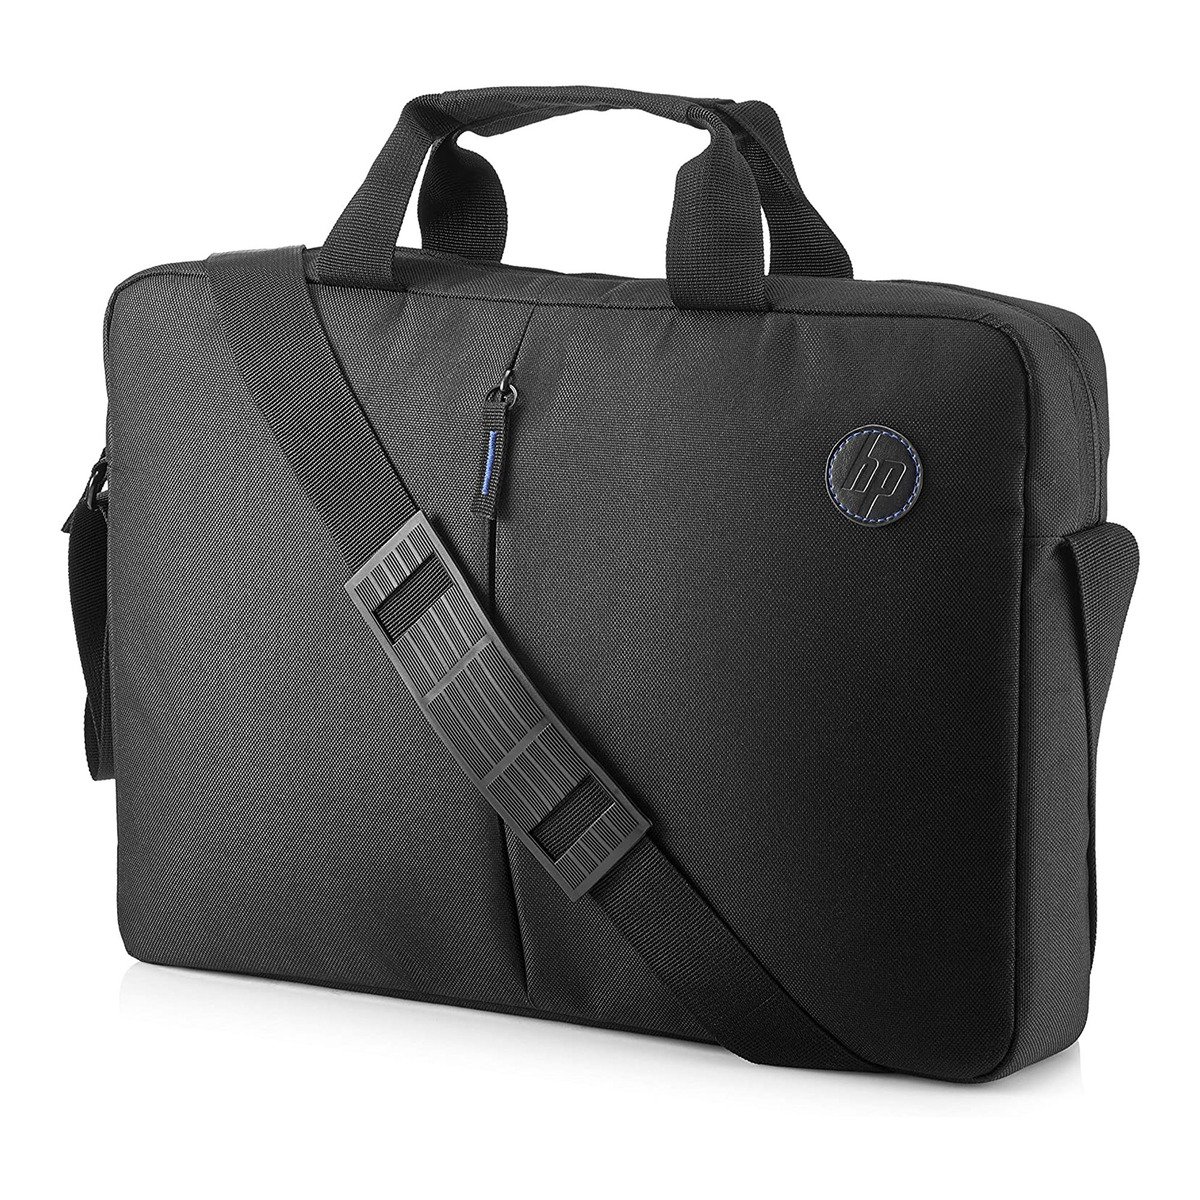 Wagon-R Vibes Laptop Bag 5002 15.6 inches